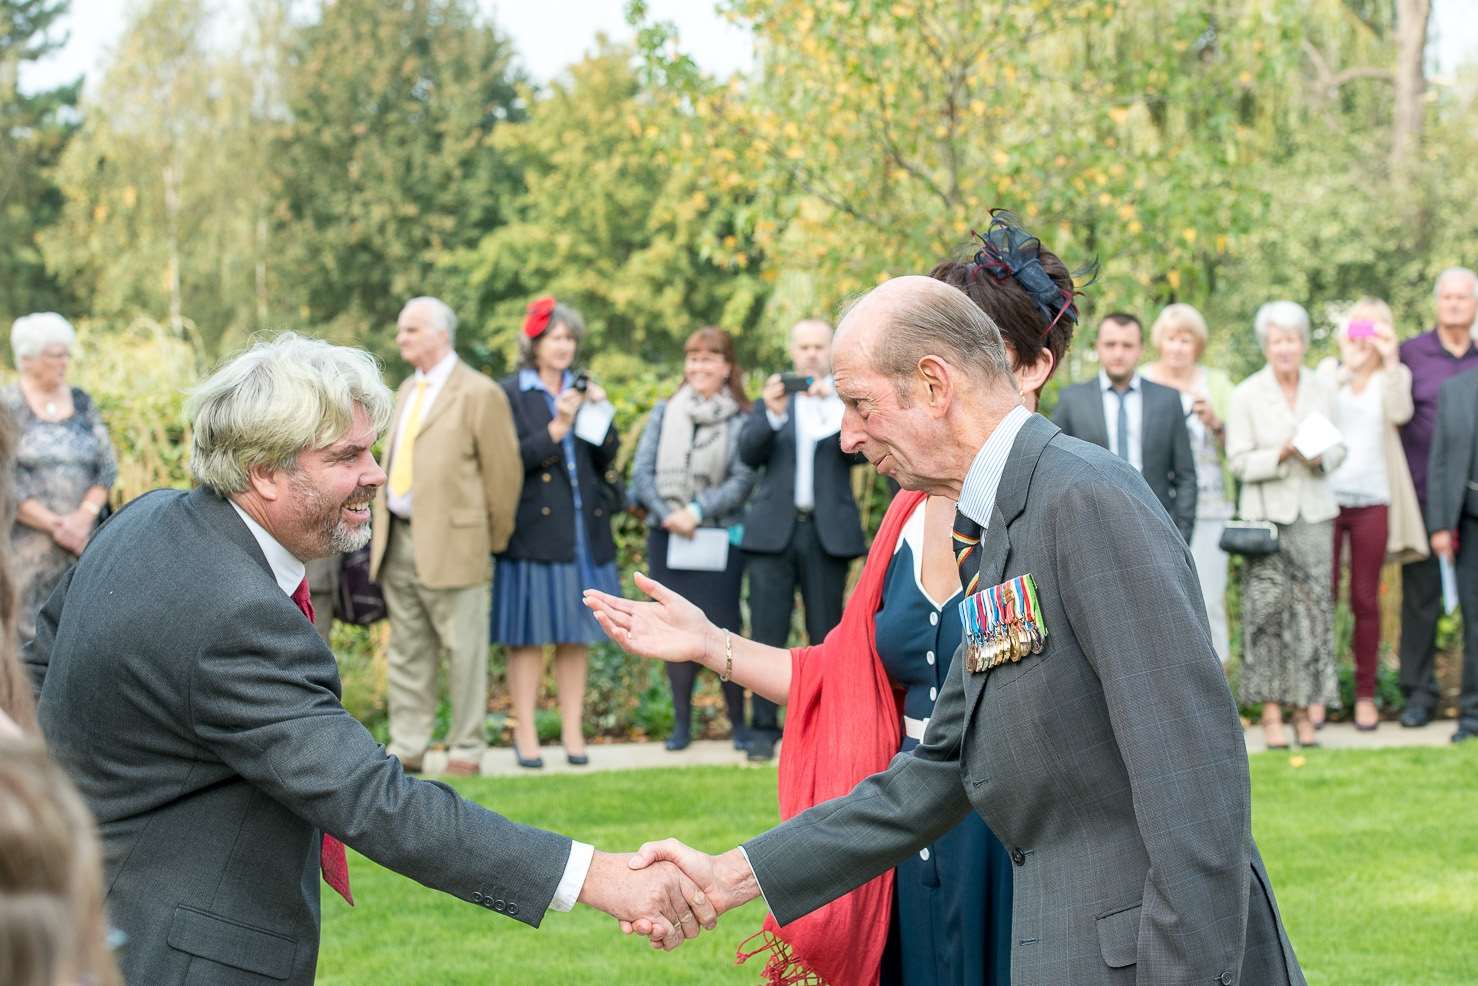 His Royal Highness, the Duke of Kent, shaking hands with sculptor Guy Portelli